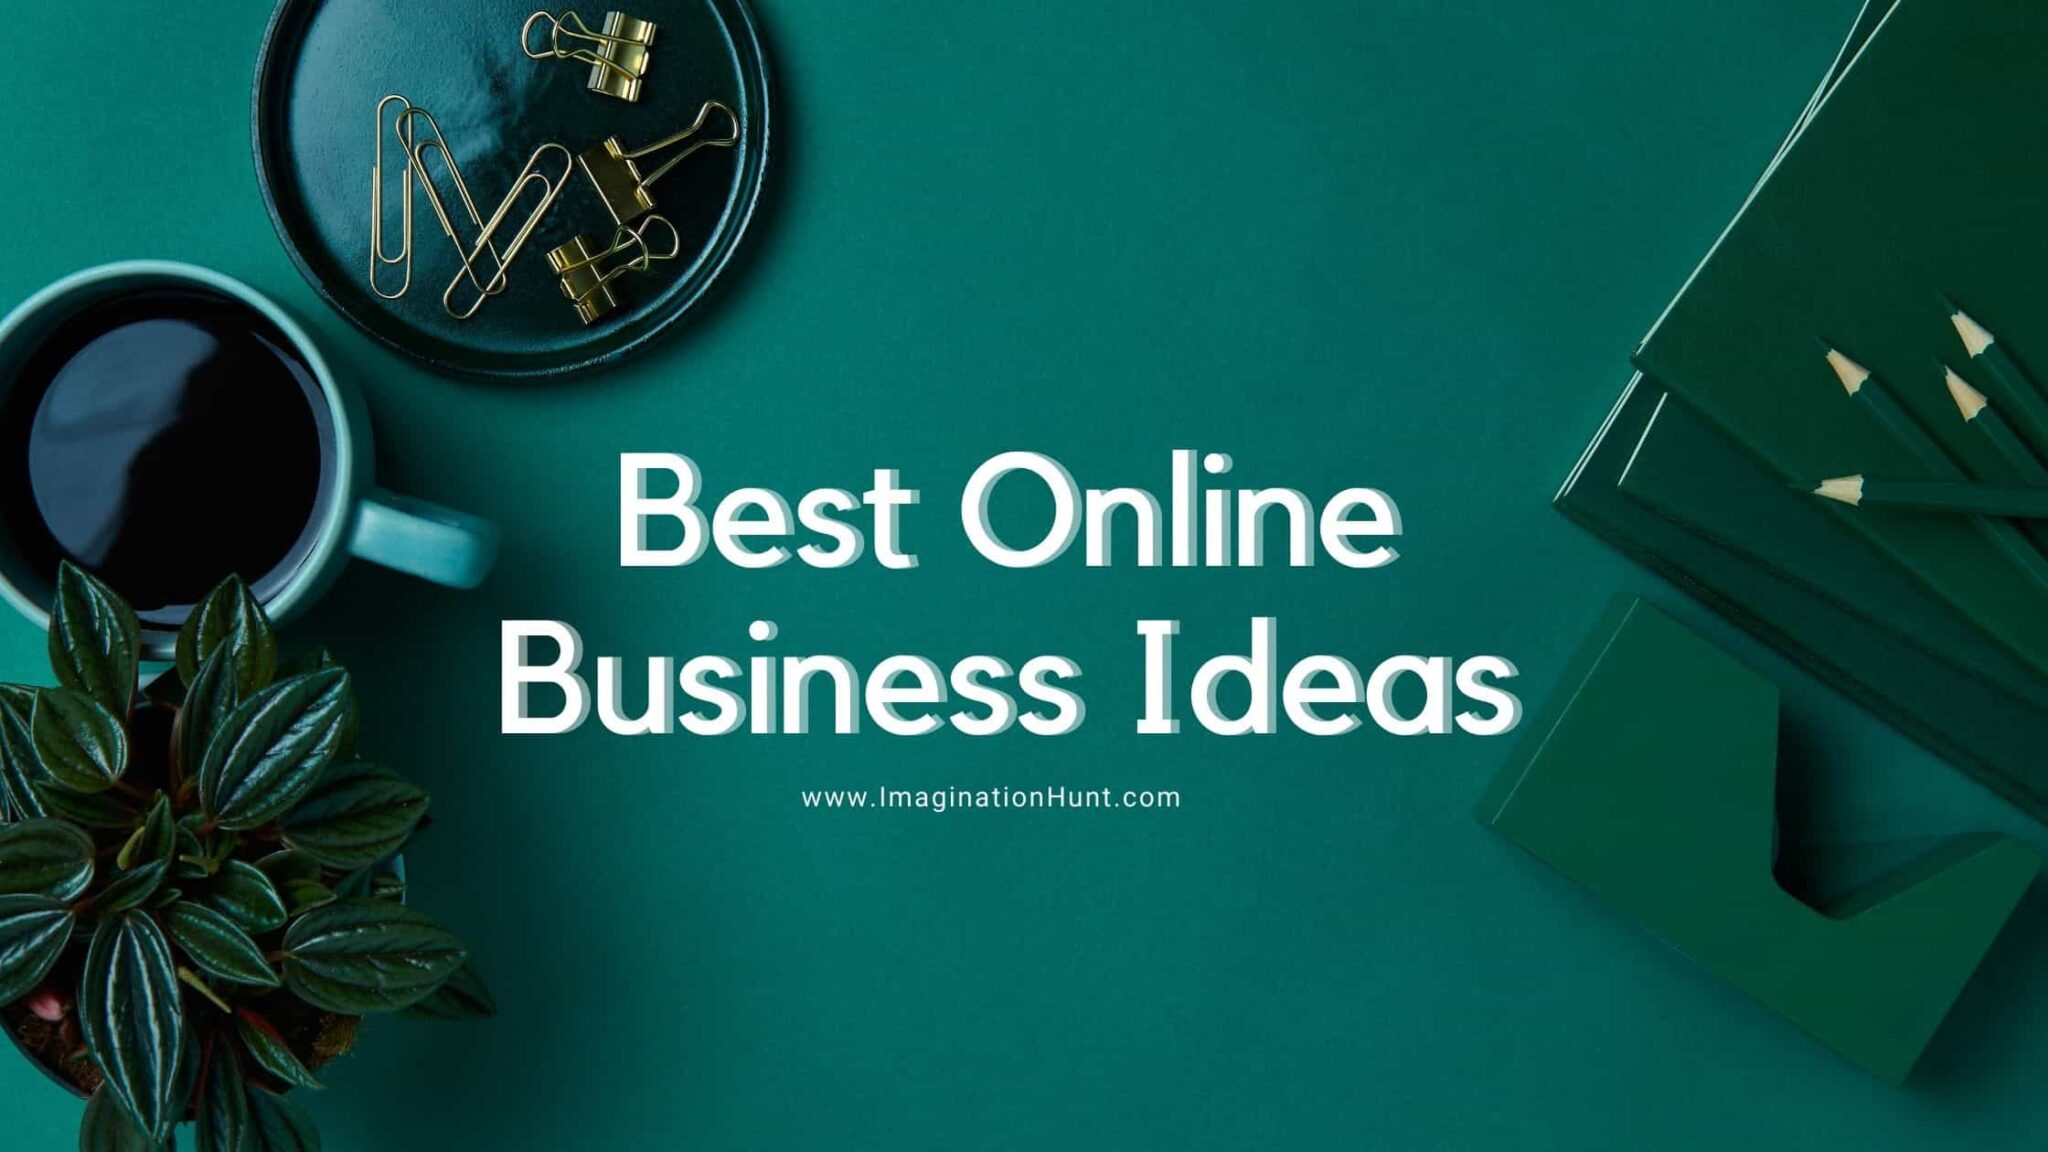 Best Online Business Ideas - You can Start with Full Time Job